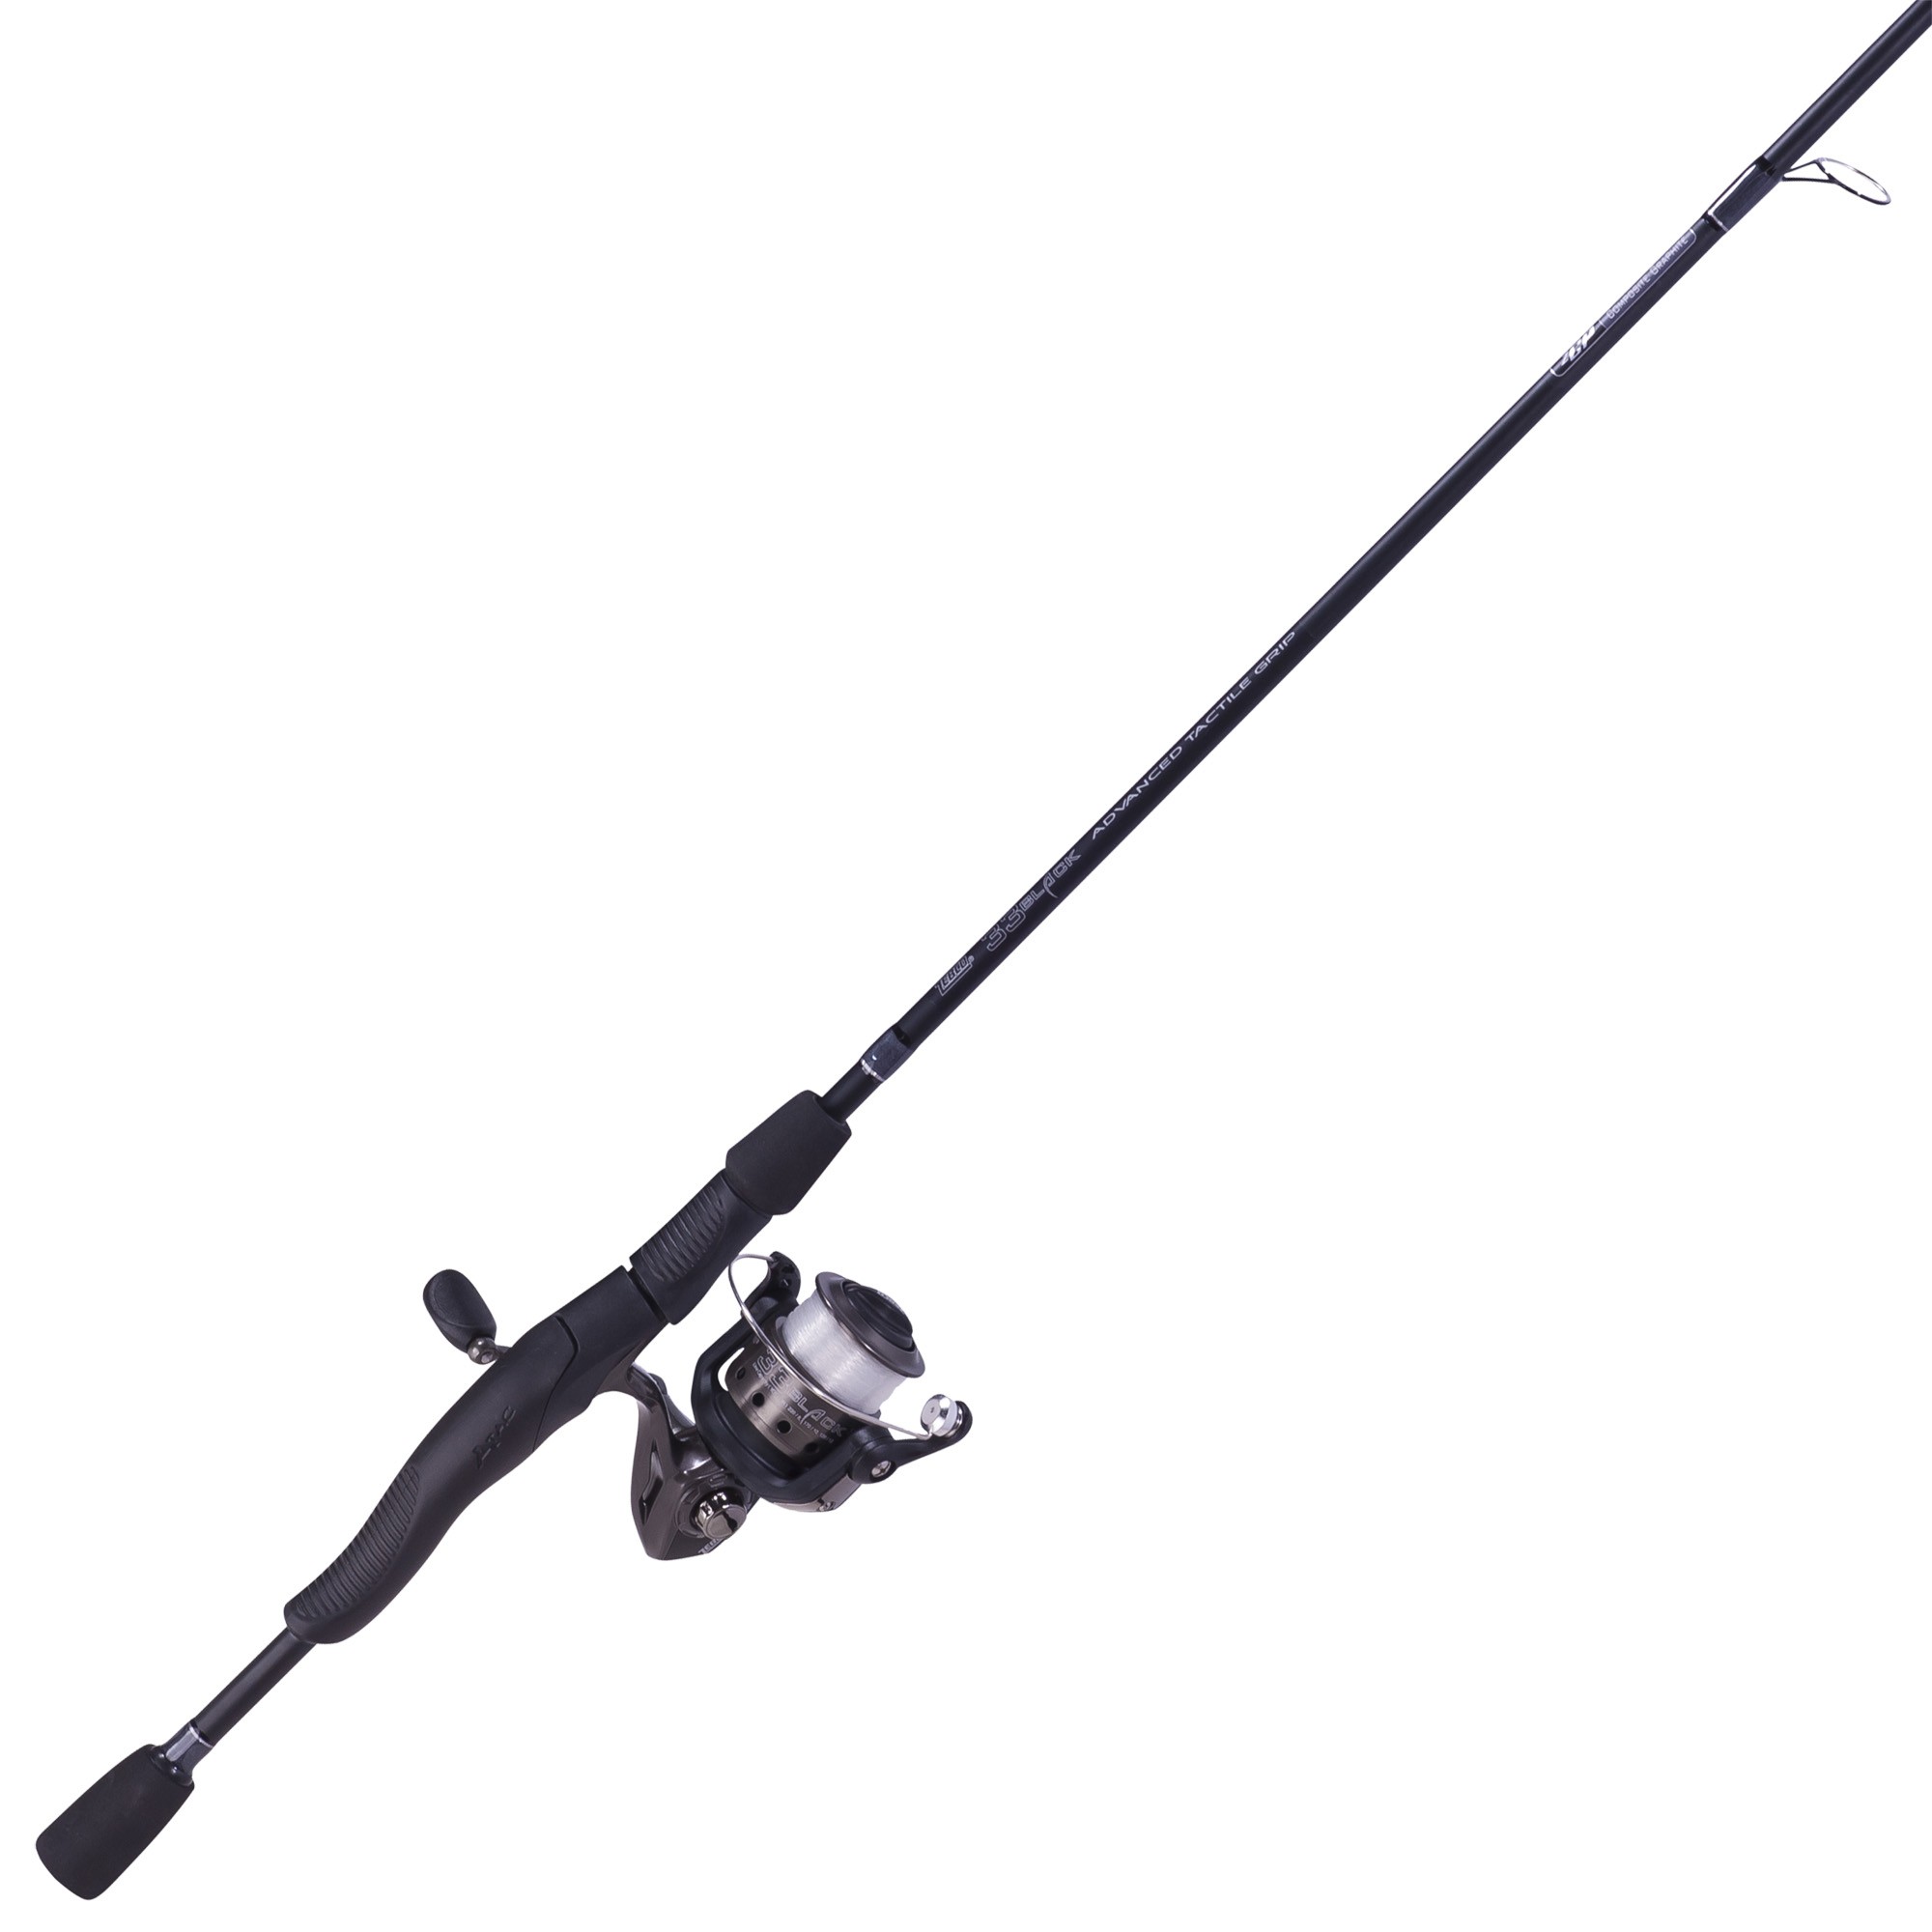 Zebco 33 Spinning Reel - Fishing Rods, Reels, Line, and Knots